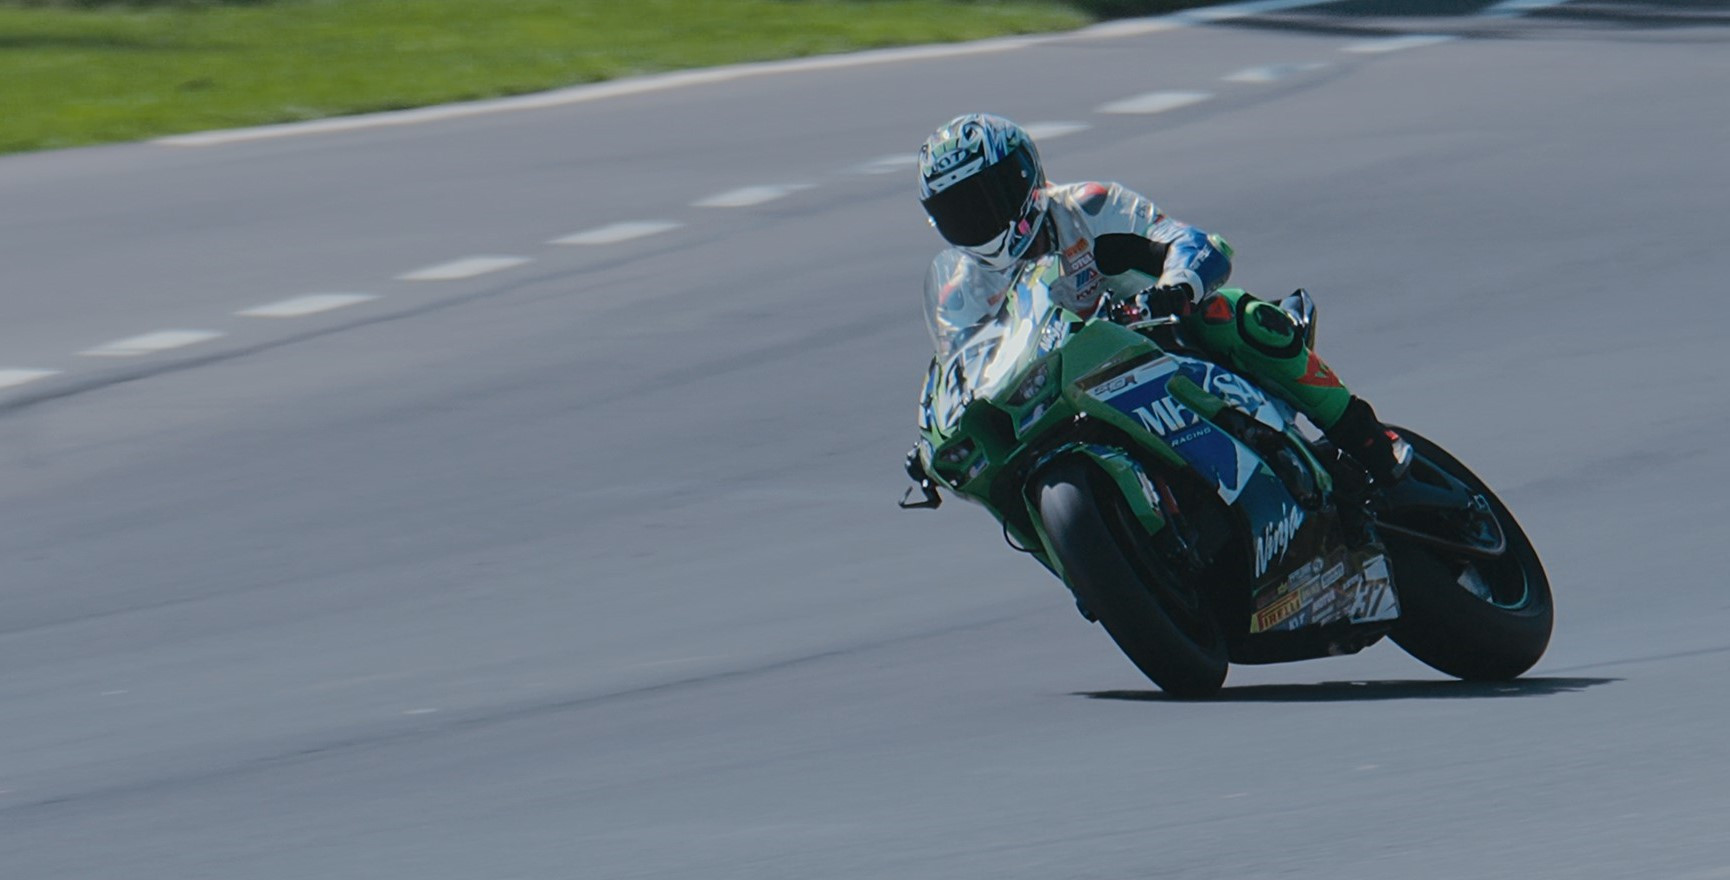 Stefano Mesa (37) used Pirelli tires to set a new motorcycle lap record at Summit Point Motorsports Park. Photo by Noisless Productions, courtesy ASRA.